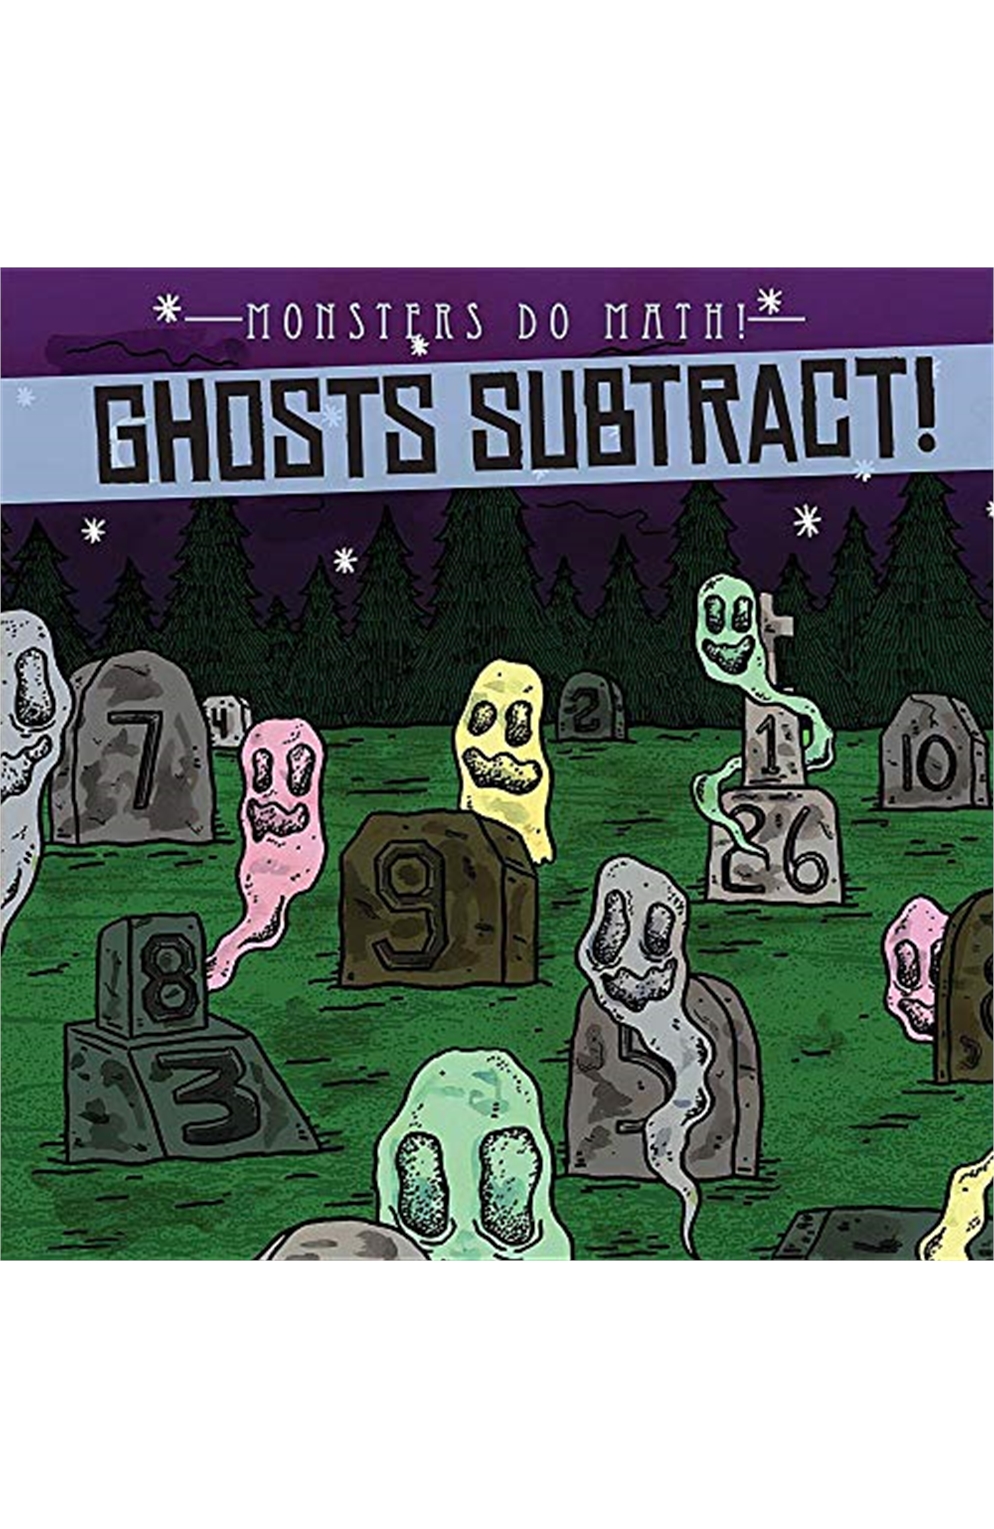 Ghosts Subtract! Monsters Do Math!